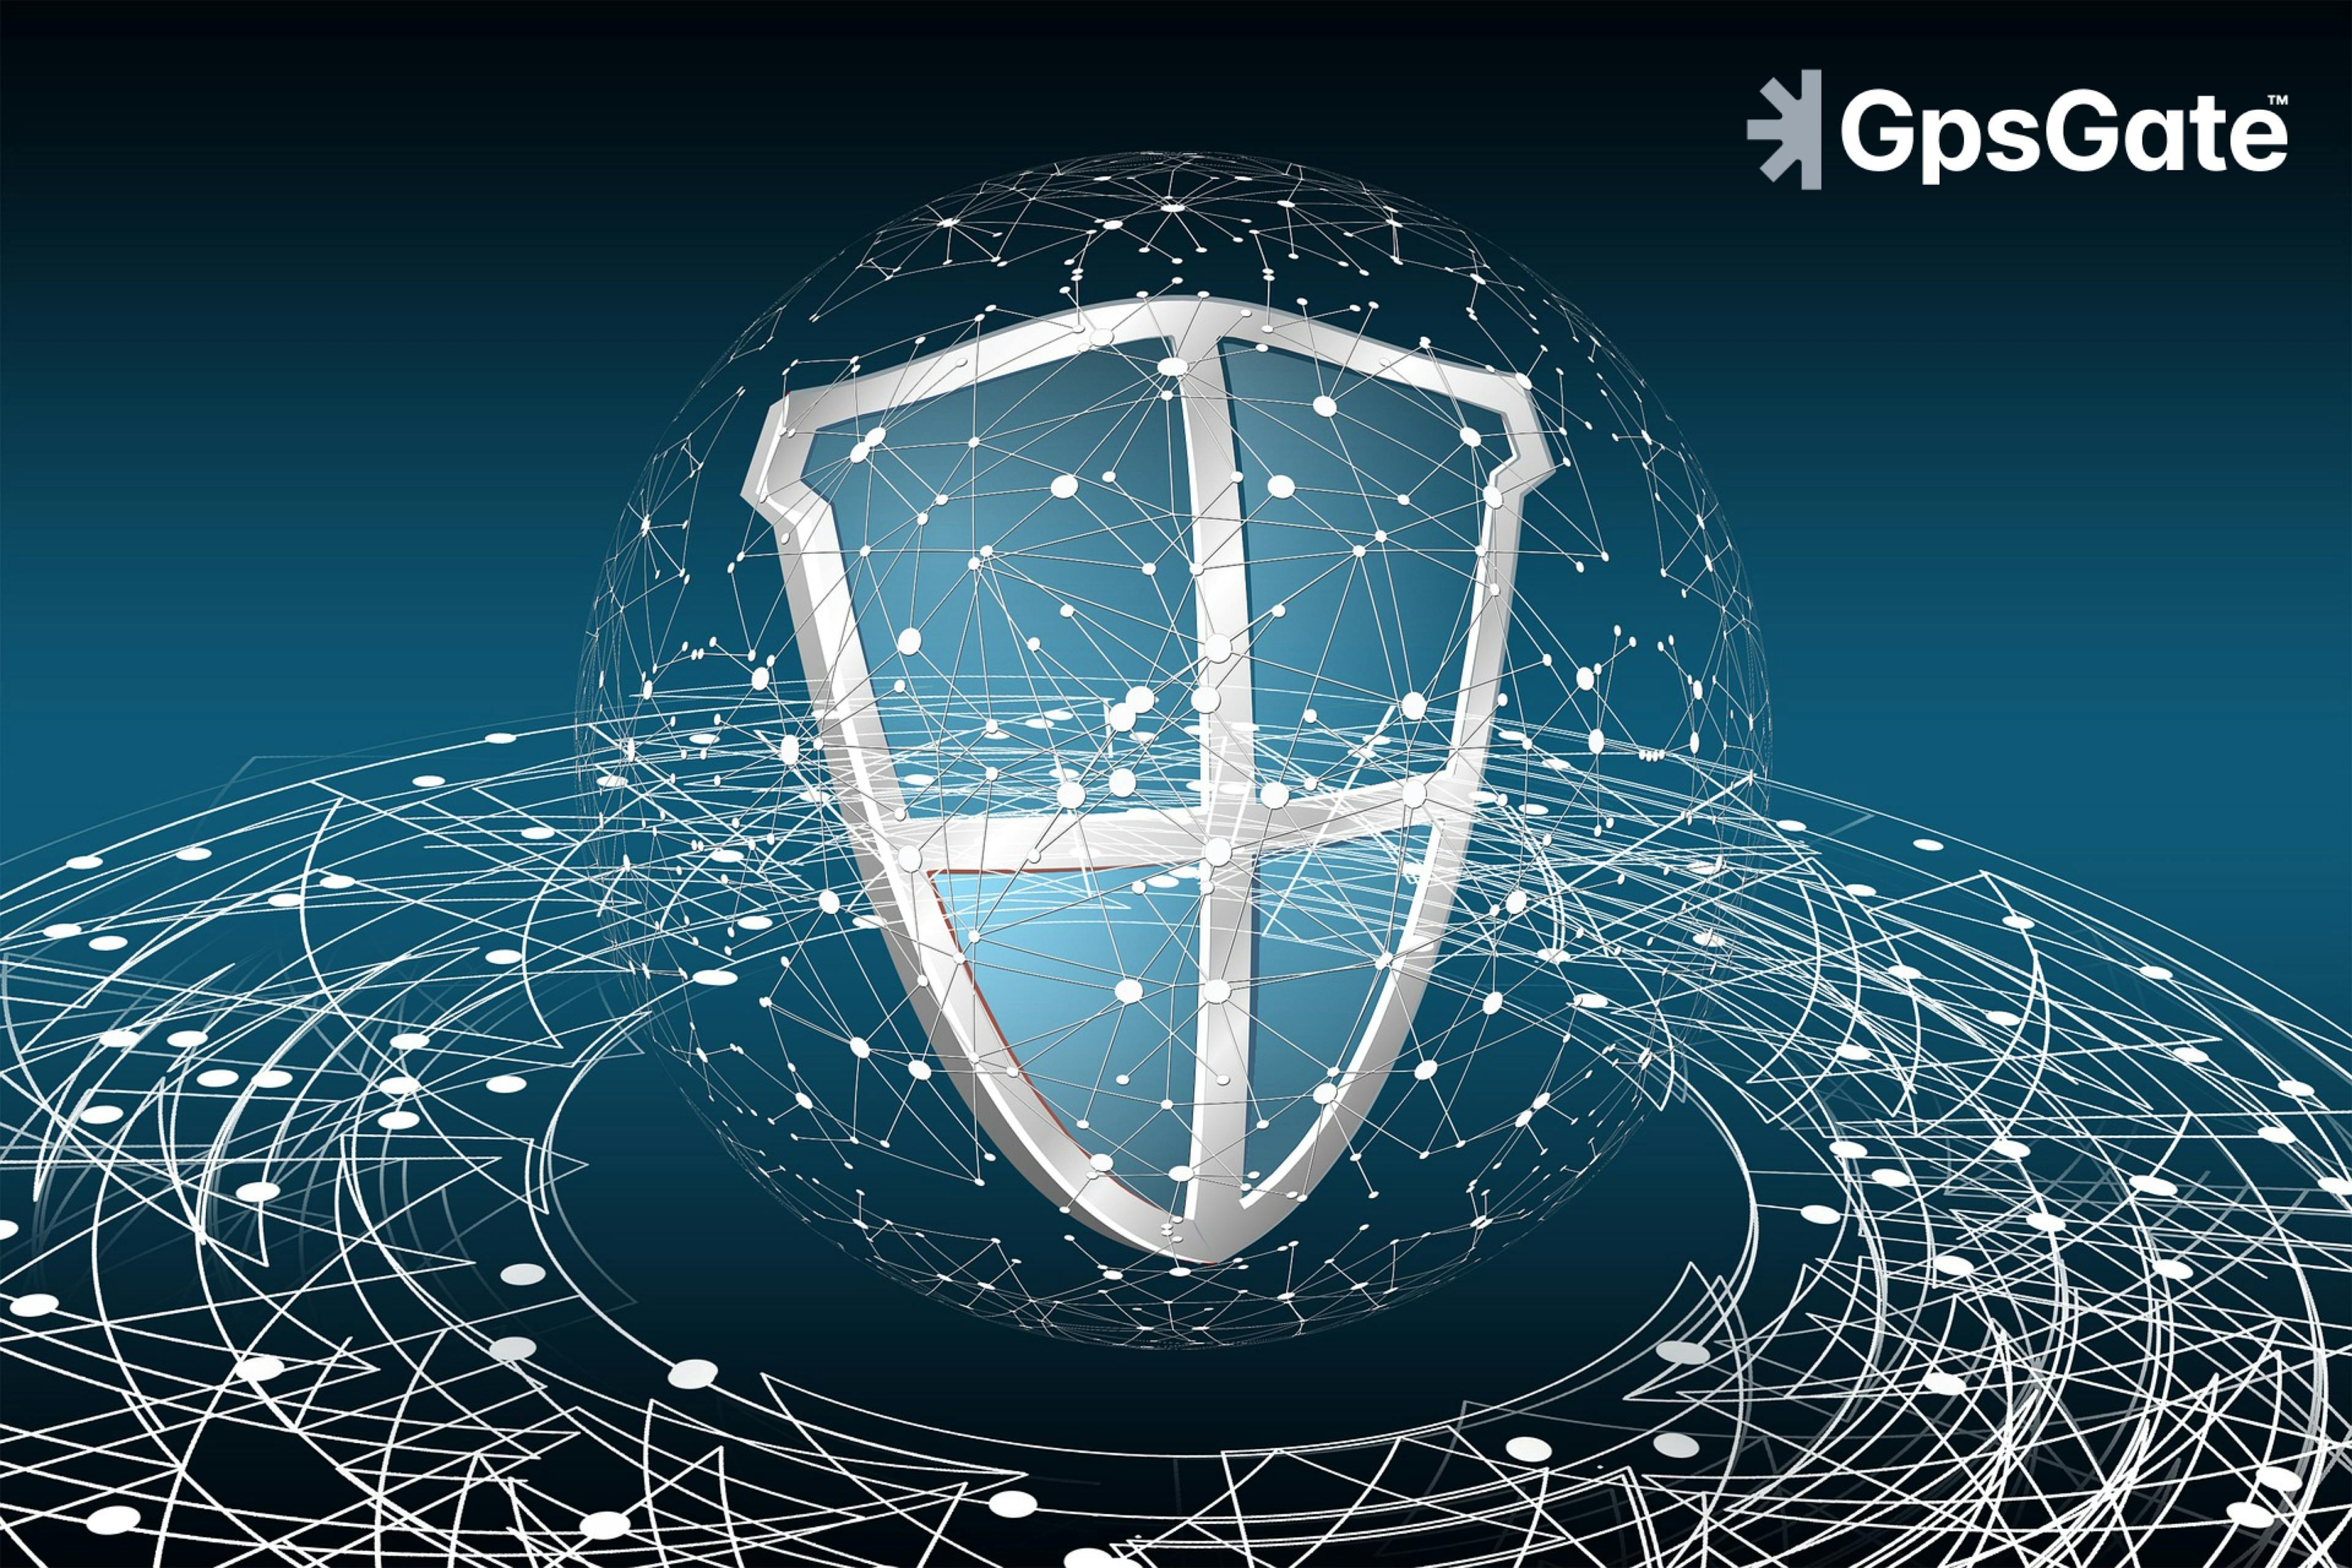 GpsGate is a secure fleet management solution - image of shield with GpsGate logo